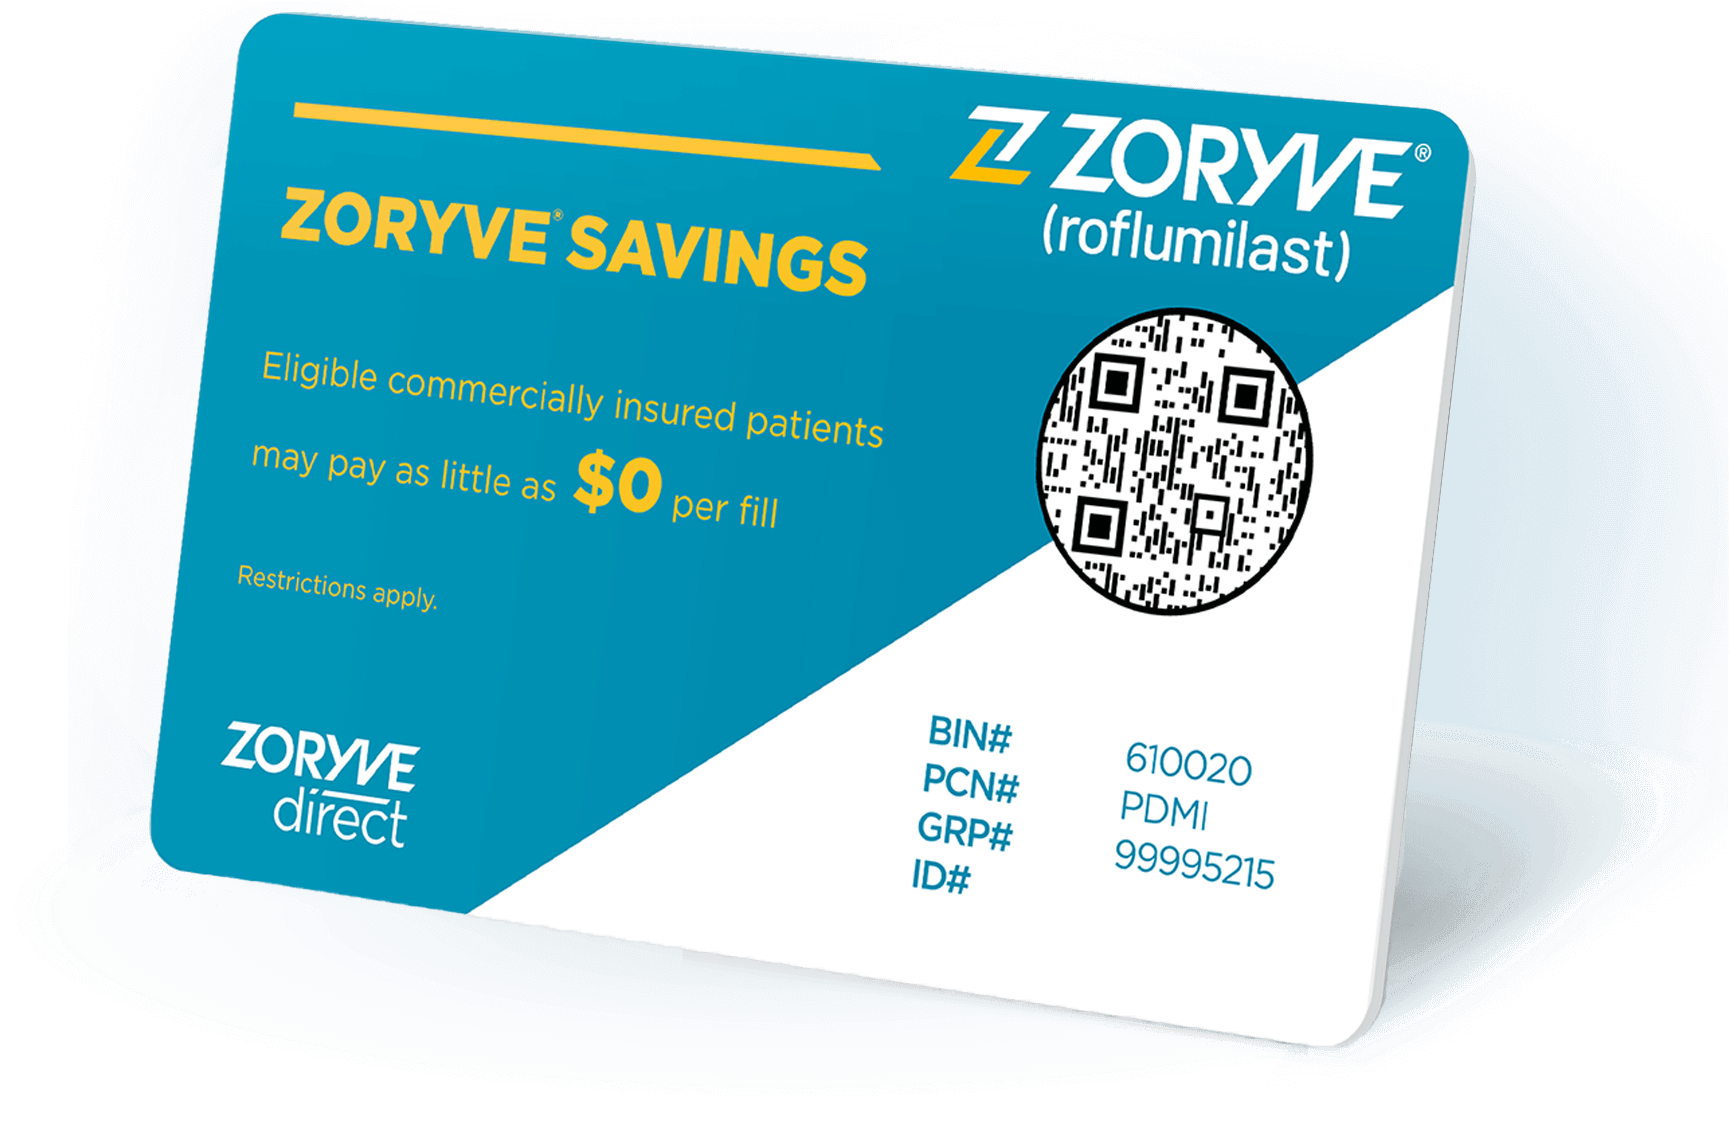 The ZORYVE Direct Savings Card is available